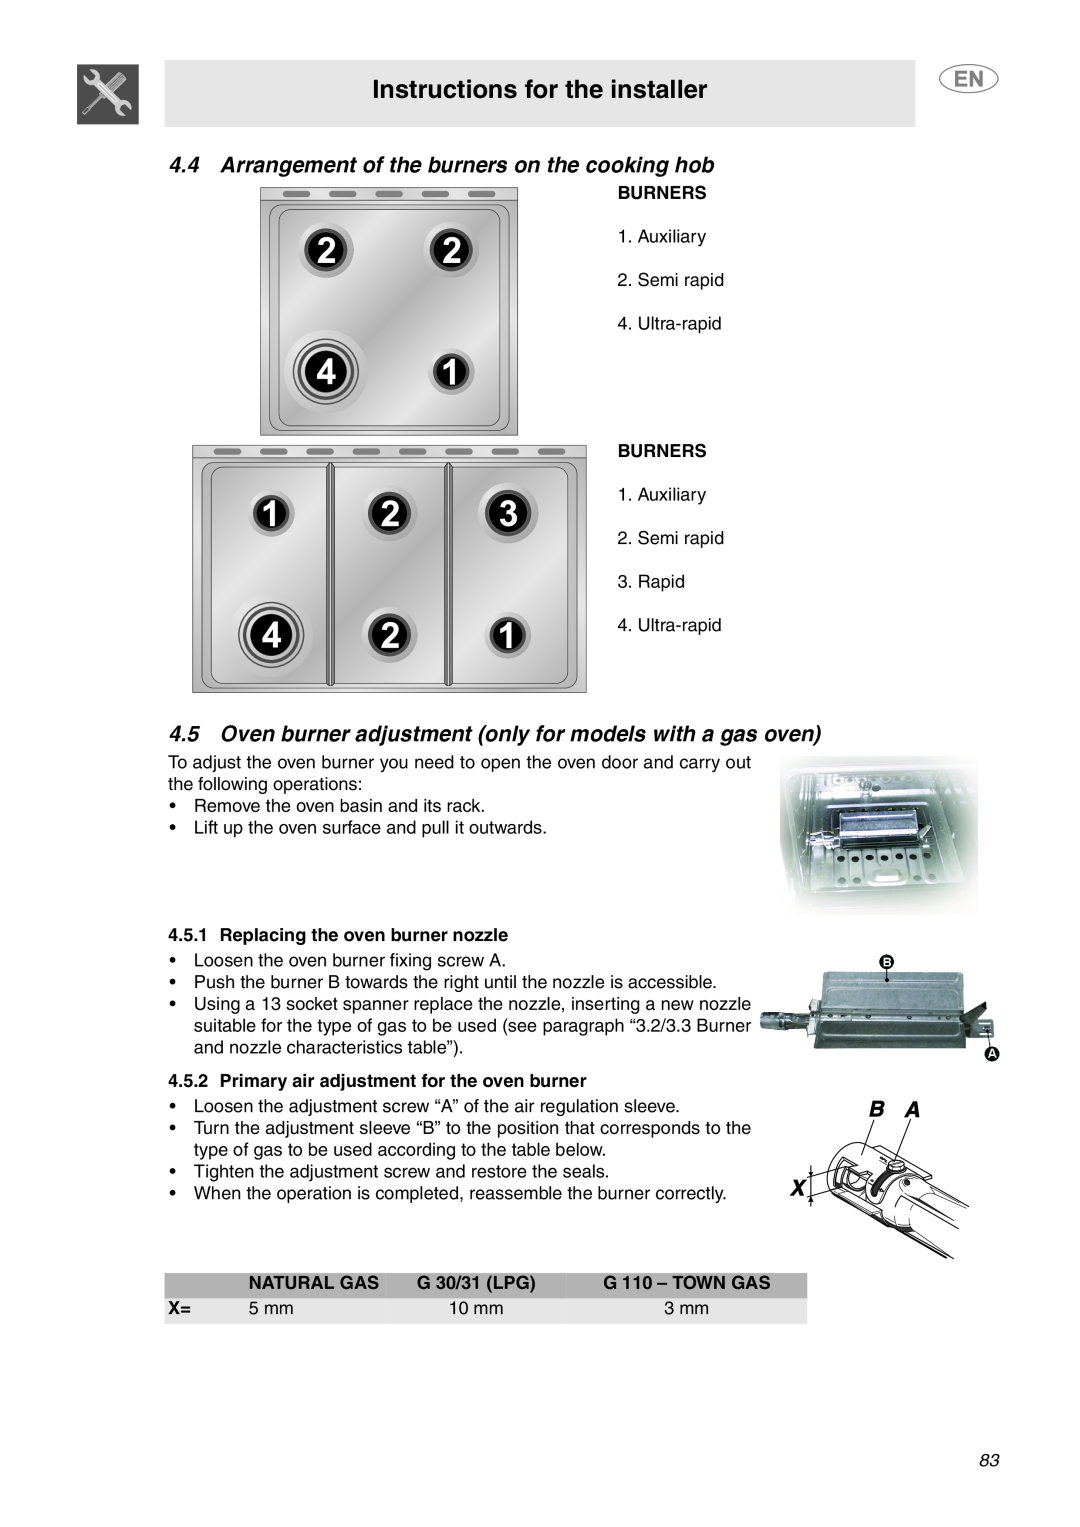 Smeg C6GVXI manual Arrangement of the burners on the cooking hob, Oven burner adjustment only for models with a gas oven 